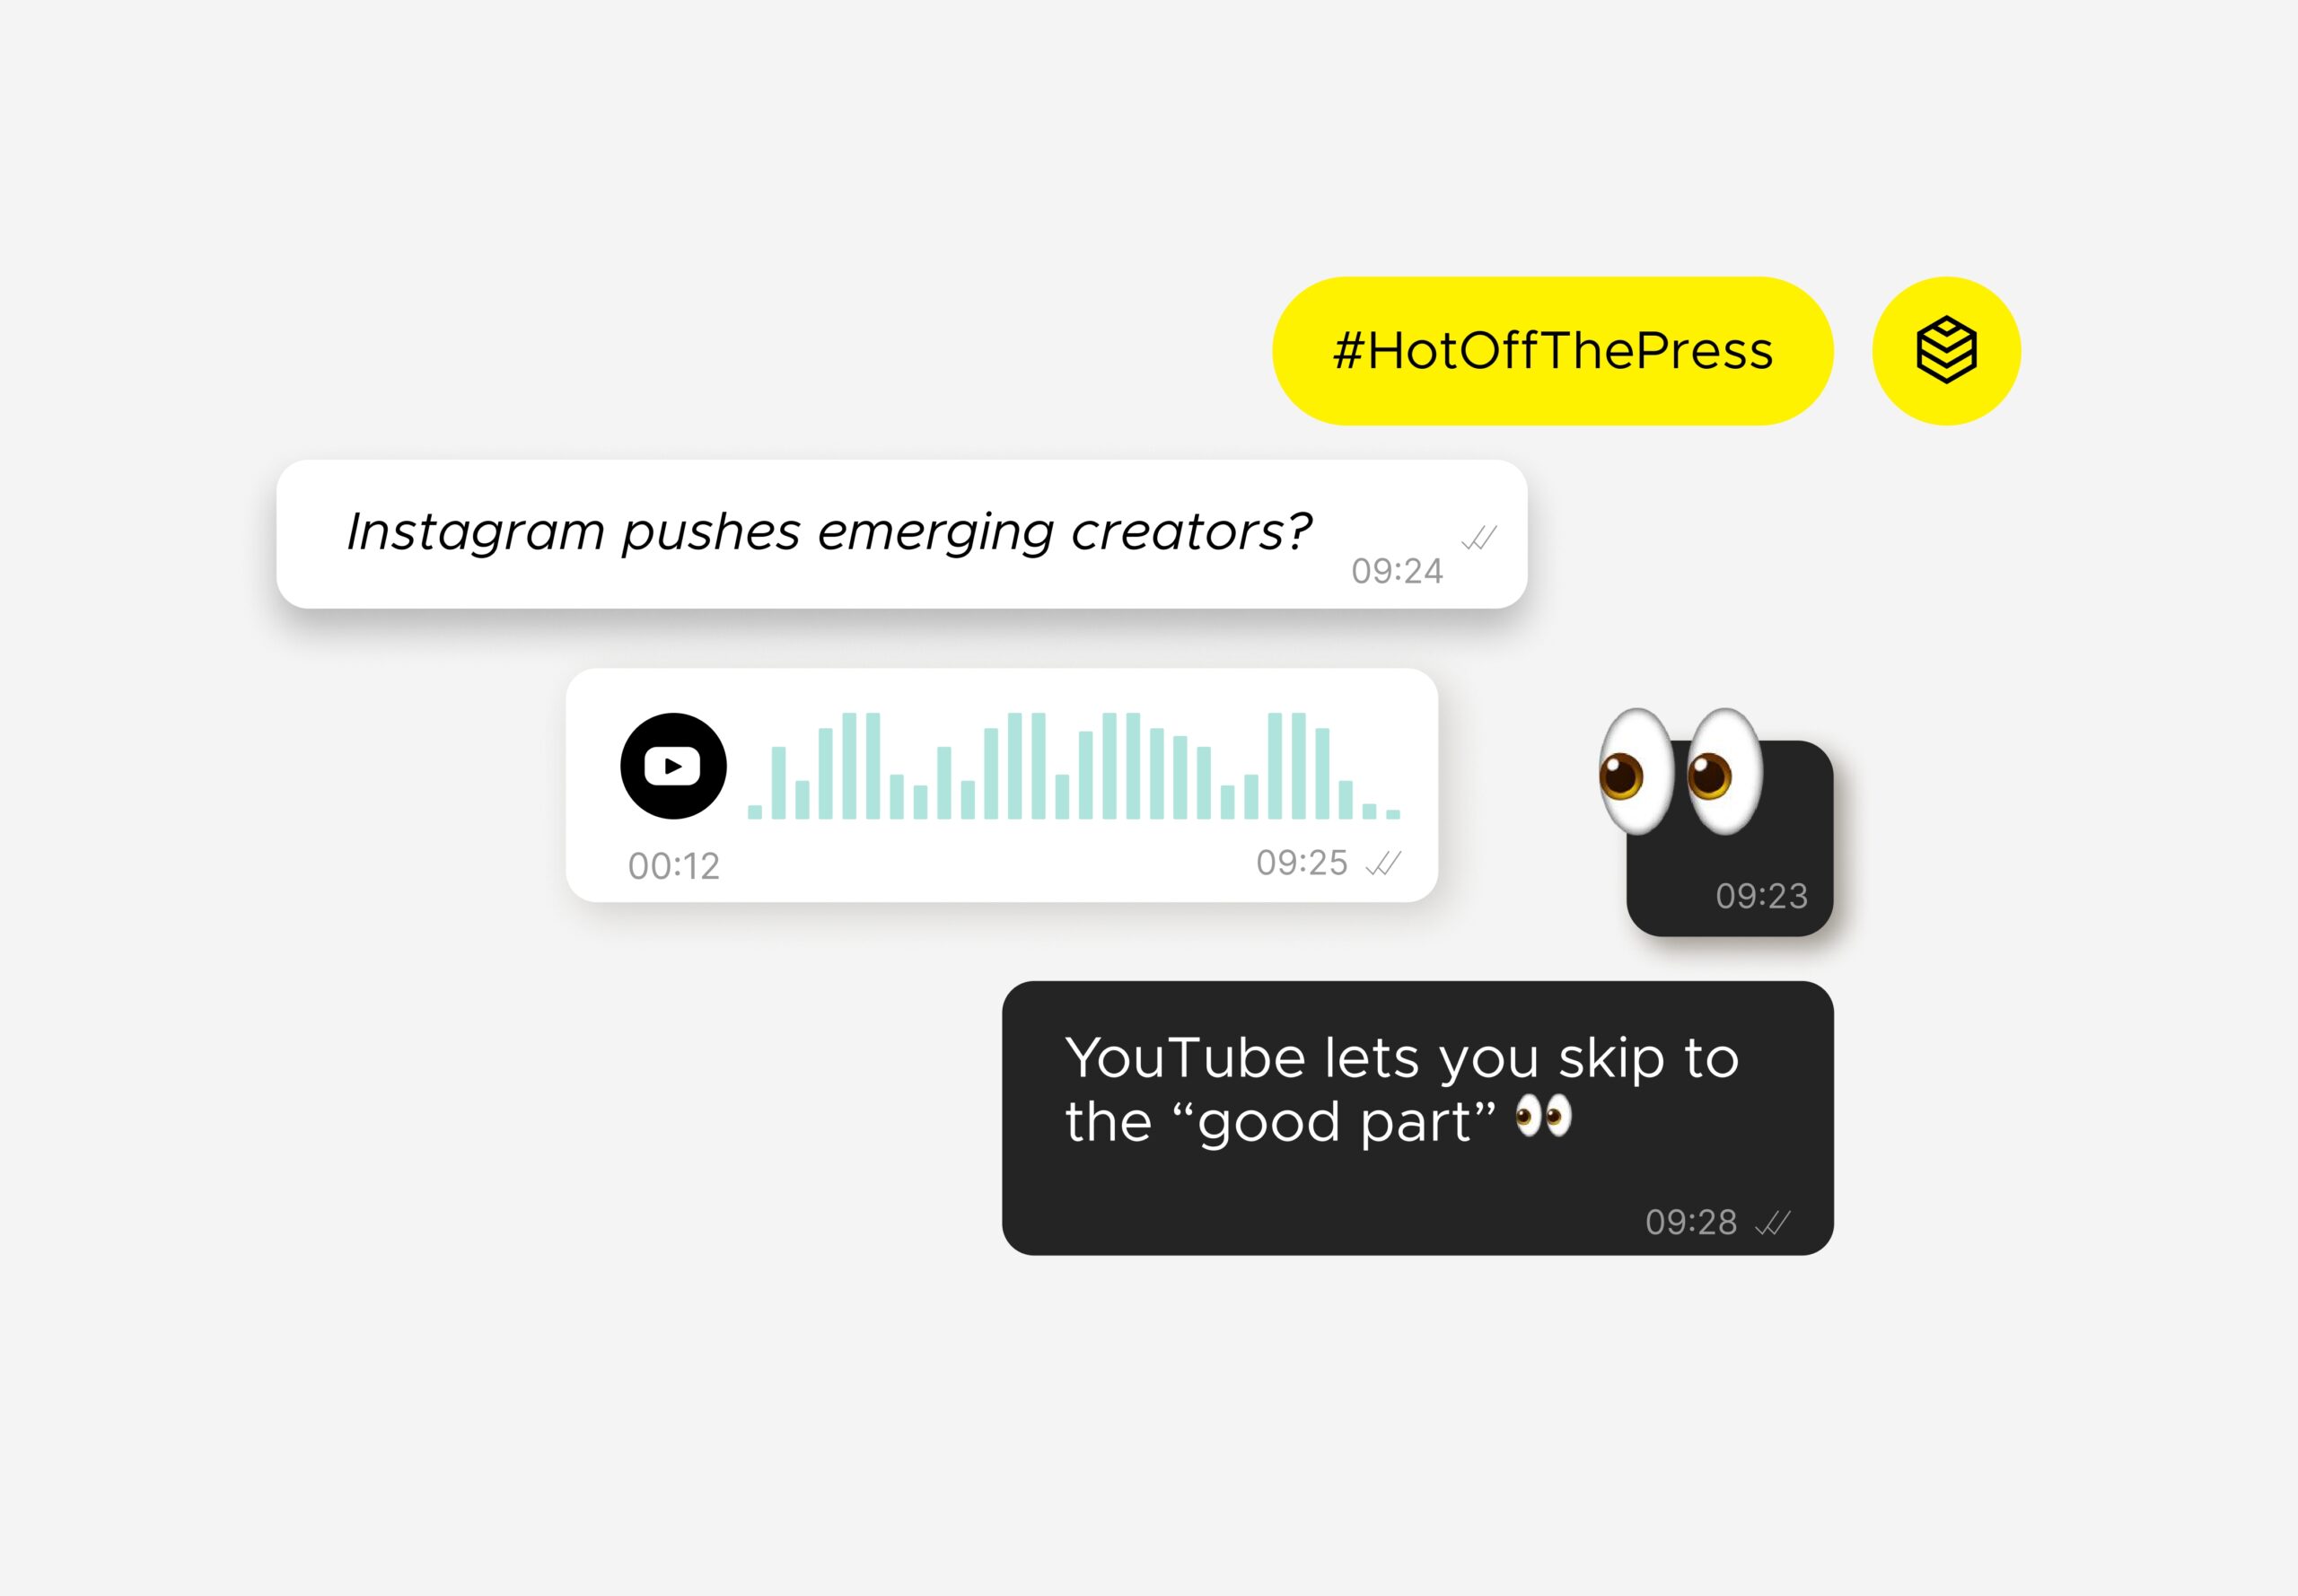 A grey background with multiple text-like speech bubbles that say "Instagram pushes emerging creators" and "YouTube lets you skip to the good part"